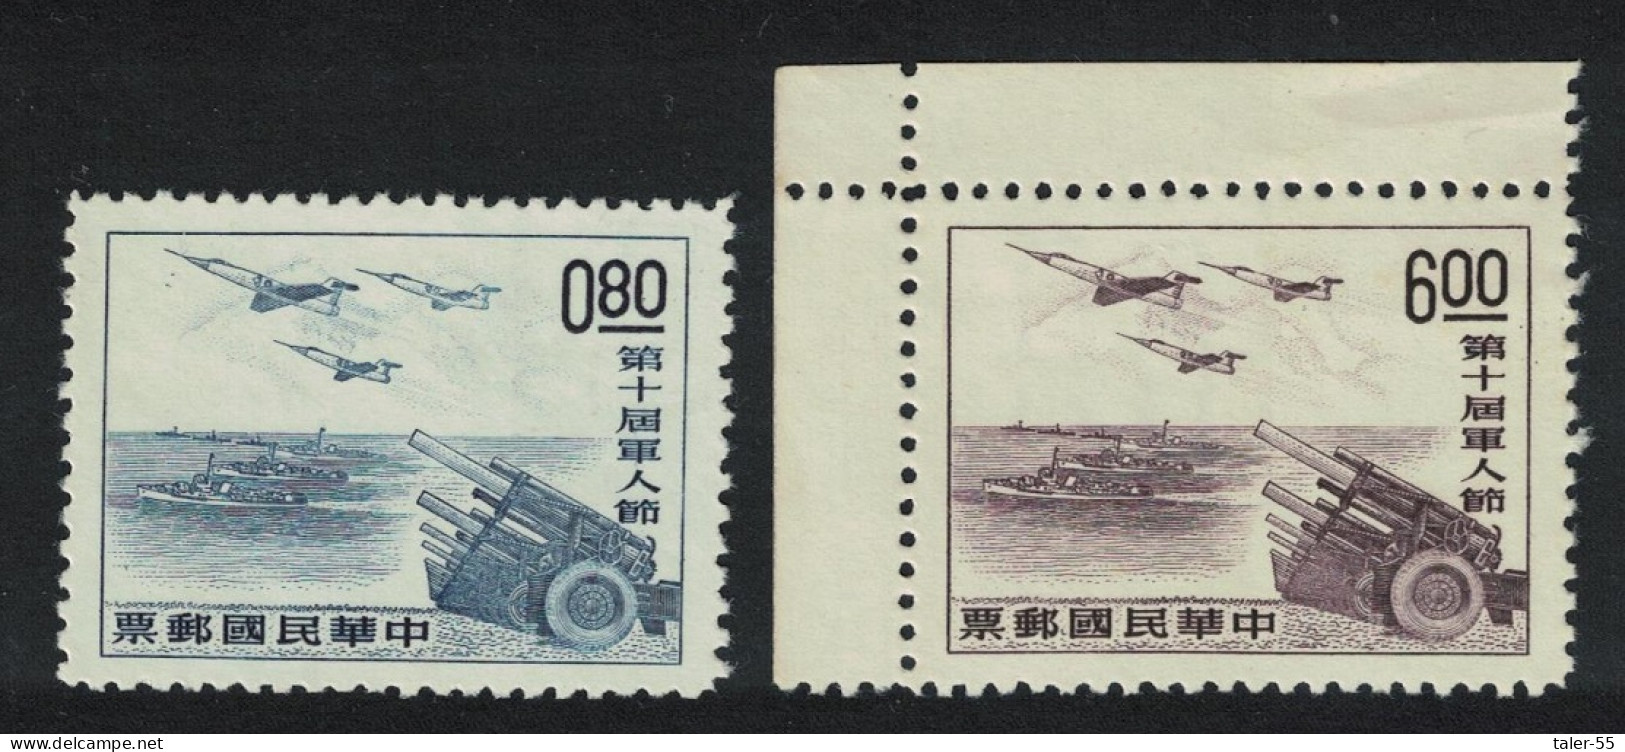 Taiwan Armed Forces Day 2v 1964 MNH SG#518-519 MI#540-541 - Nuevos